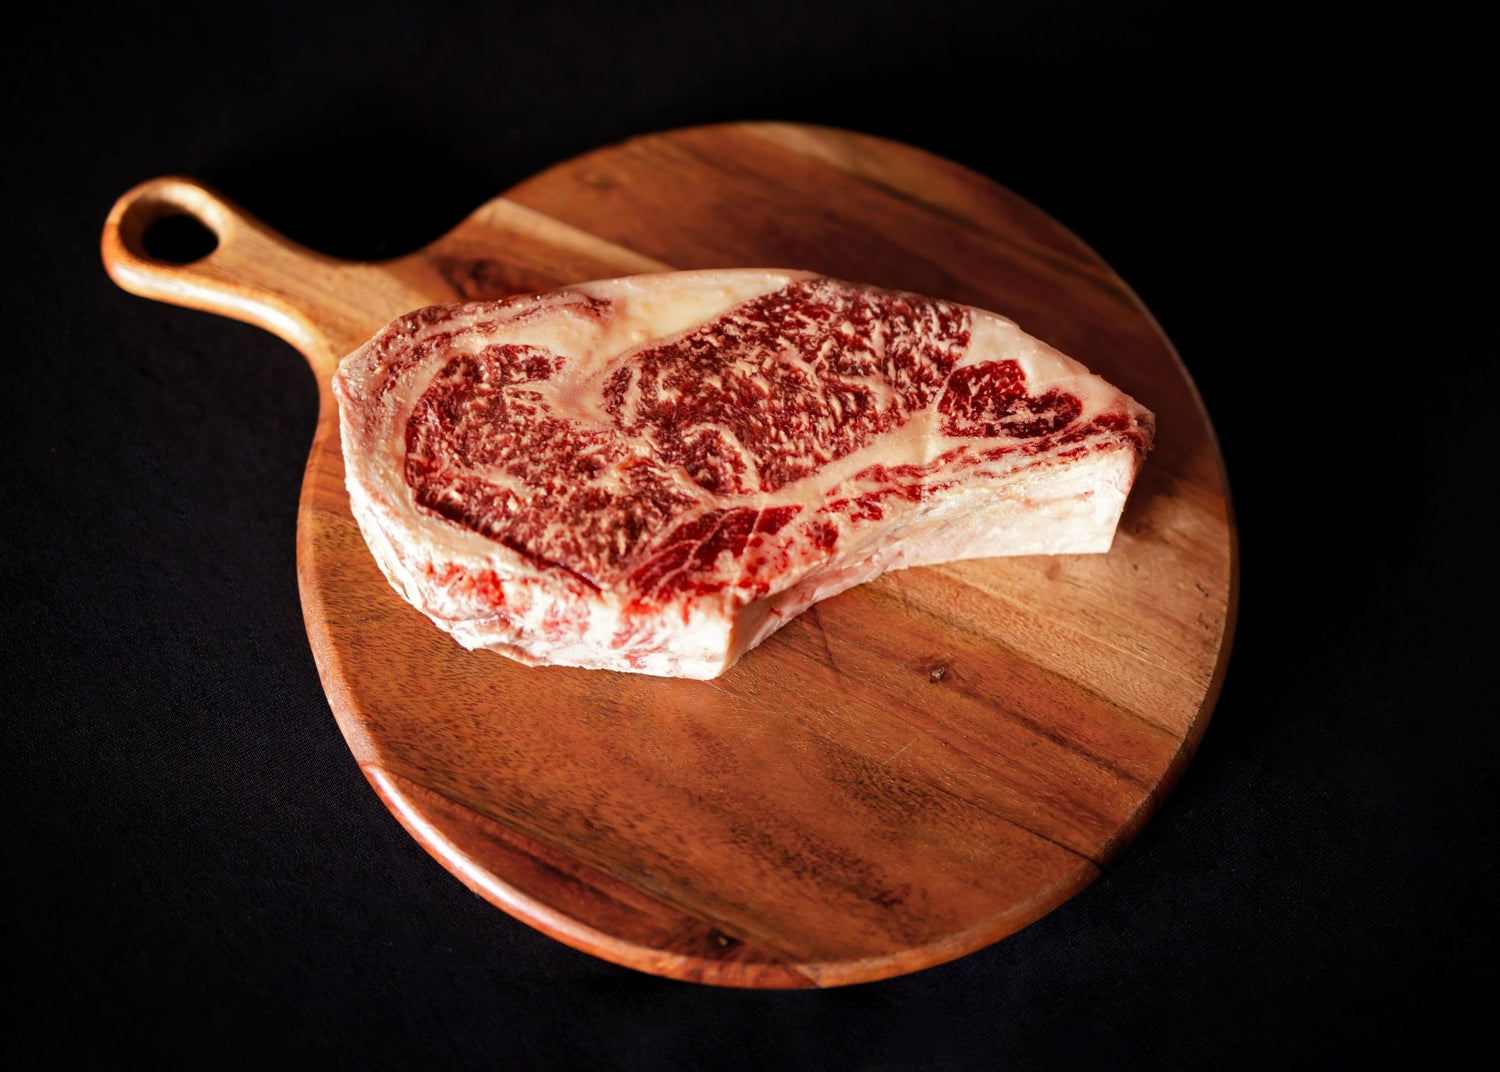 All Natural Grass & Flax-Fed & Finished Wagyu Beef - The Hufeisen-Ranch (WYO Wagyu)